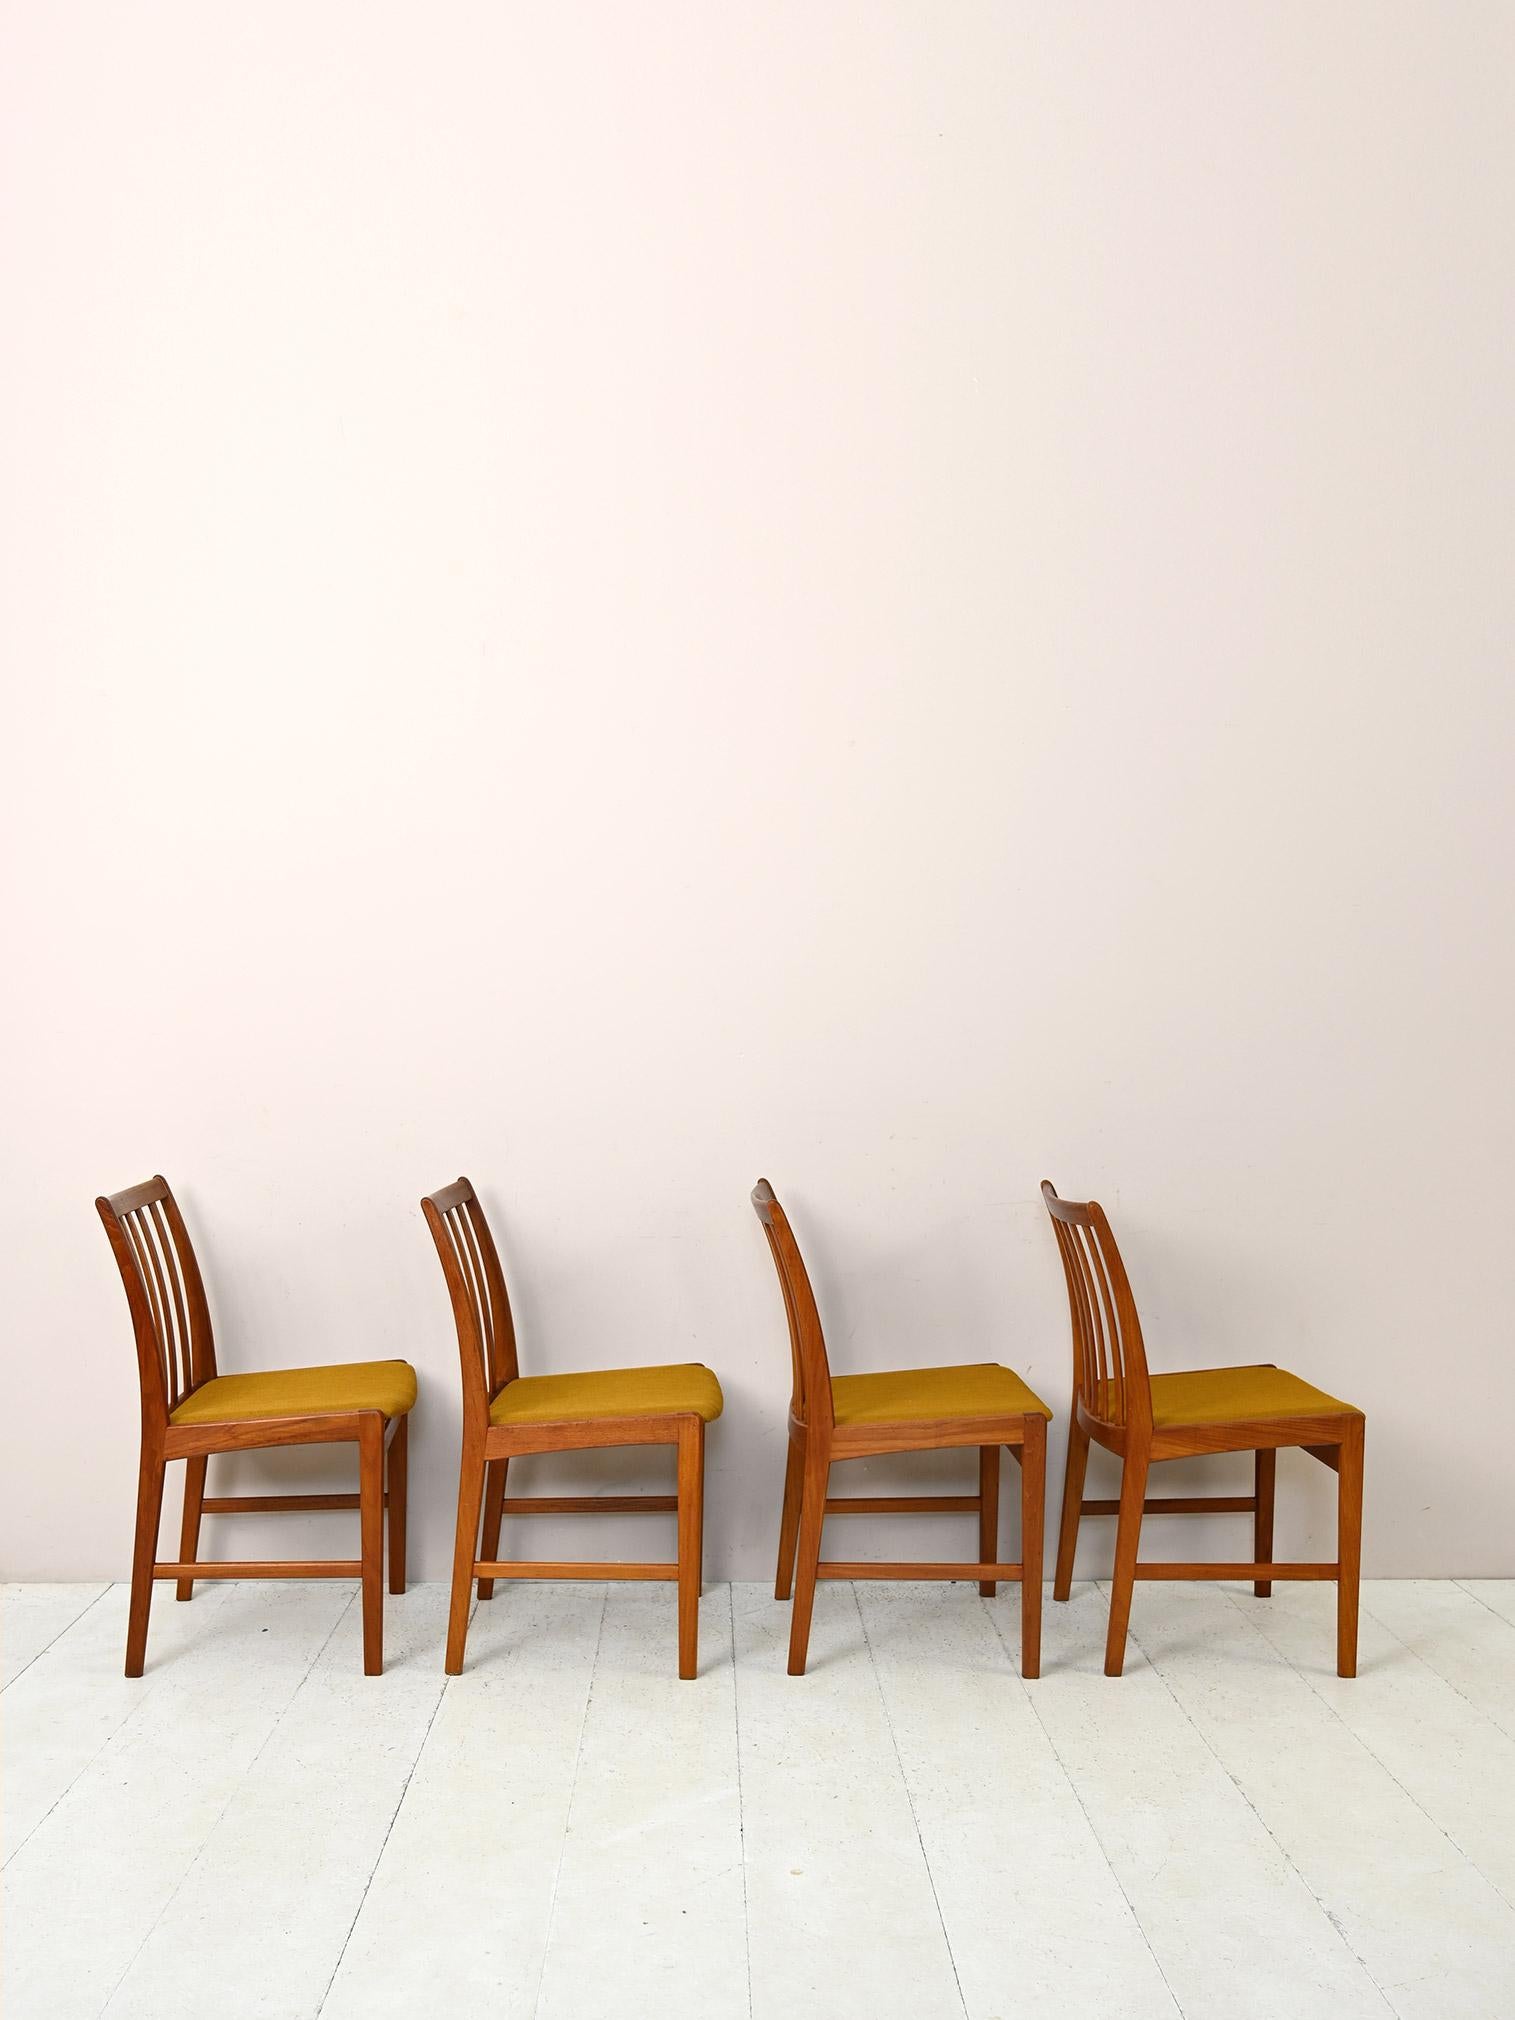 Mid-20th Century Scandinavian Teak Chairs with Upholstered Seat For Sale